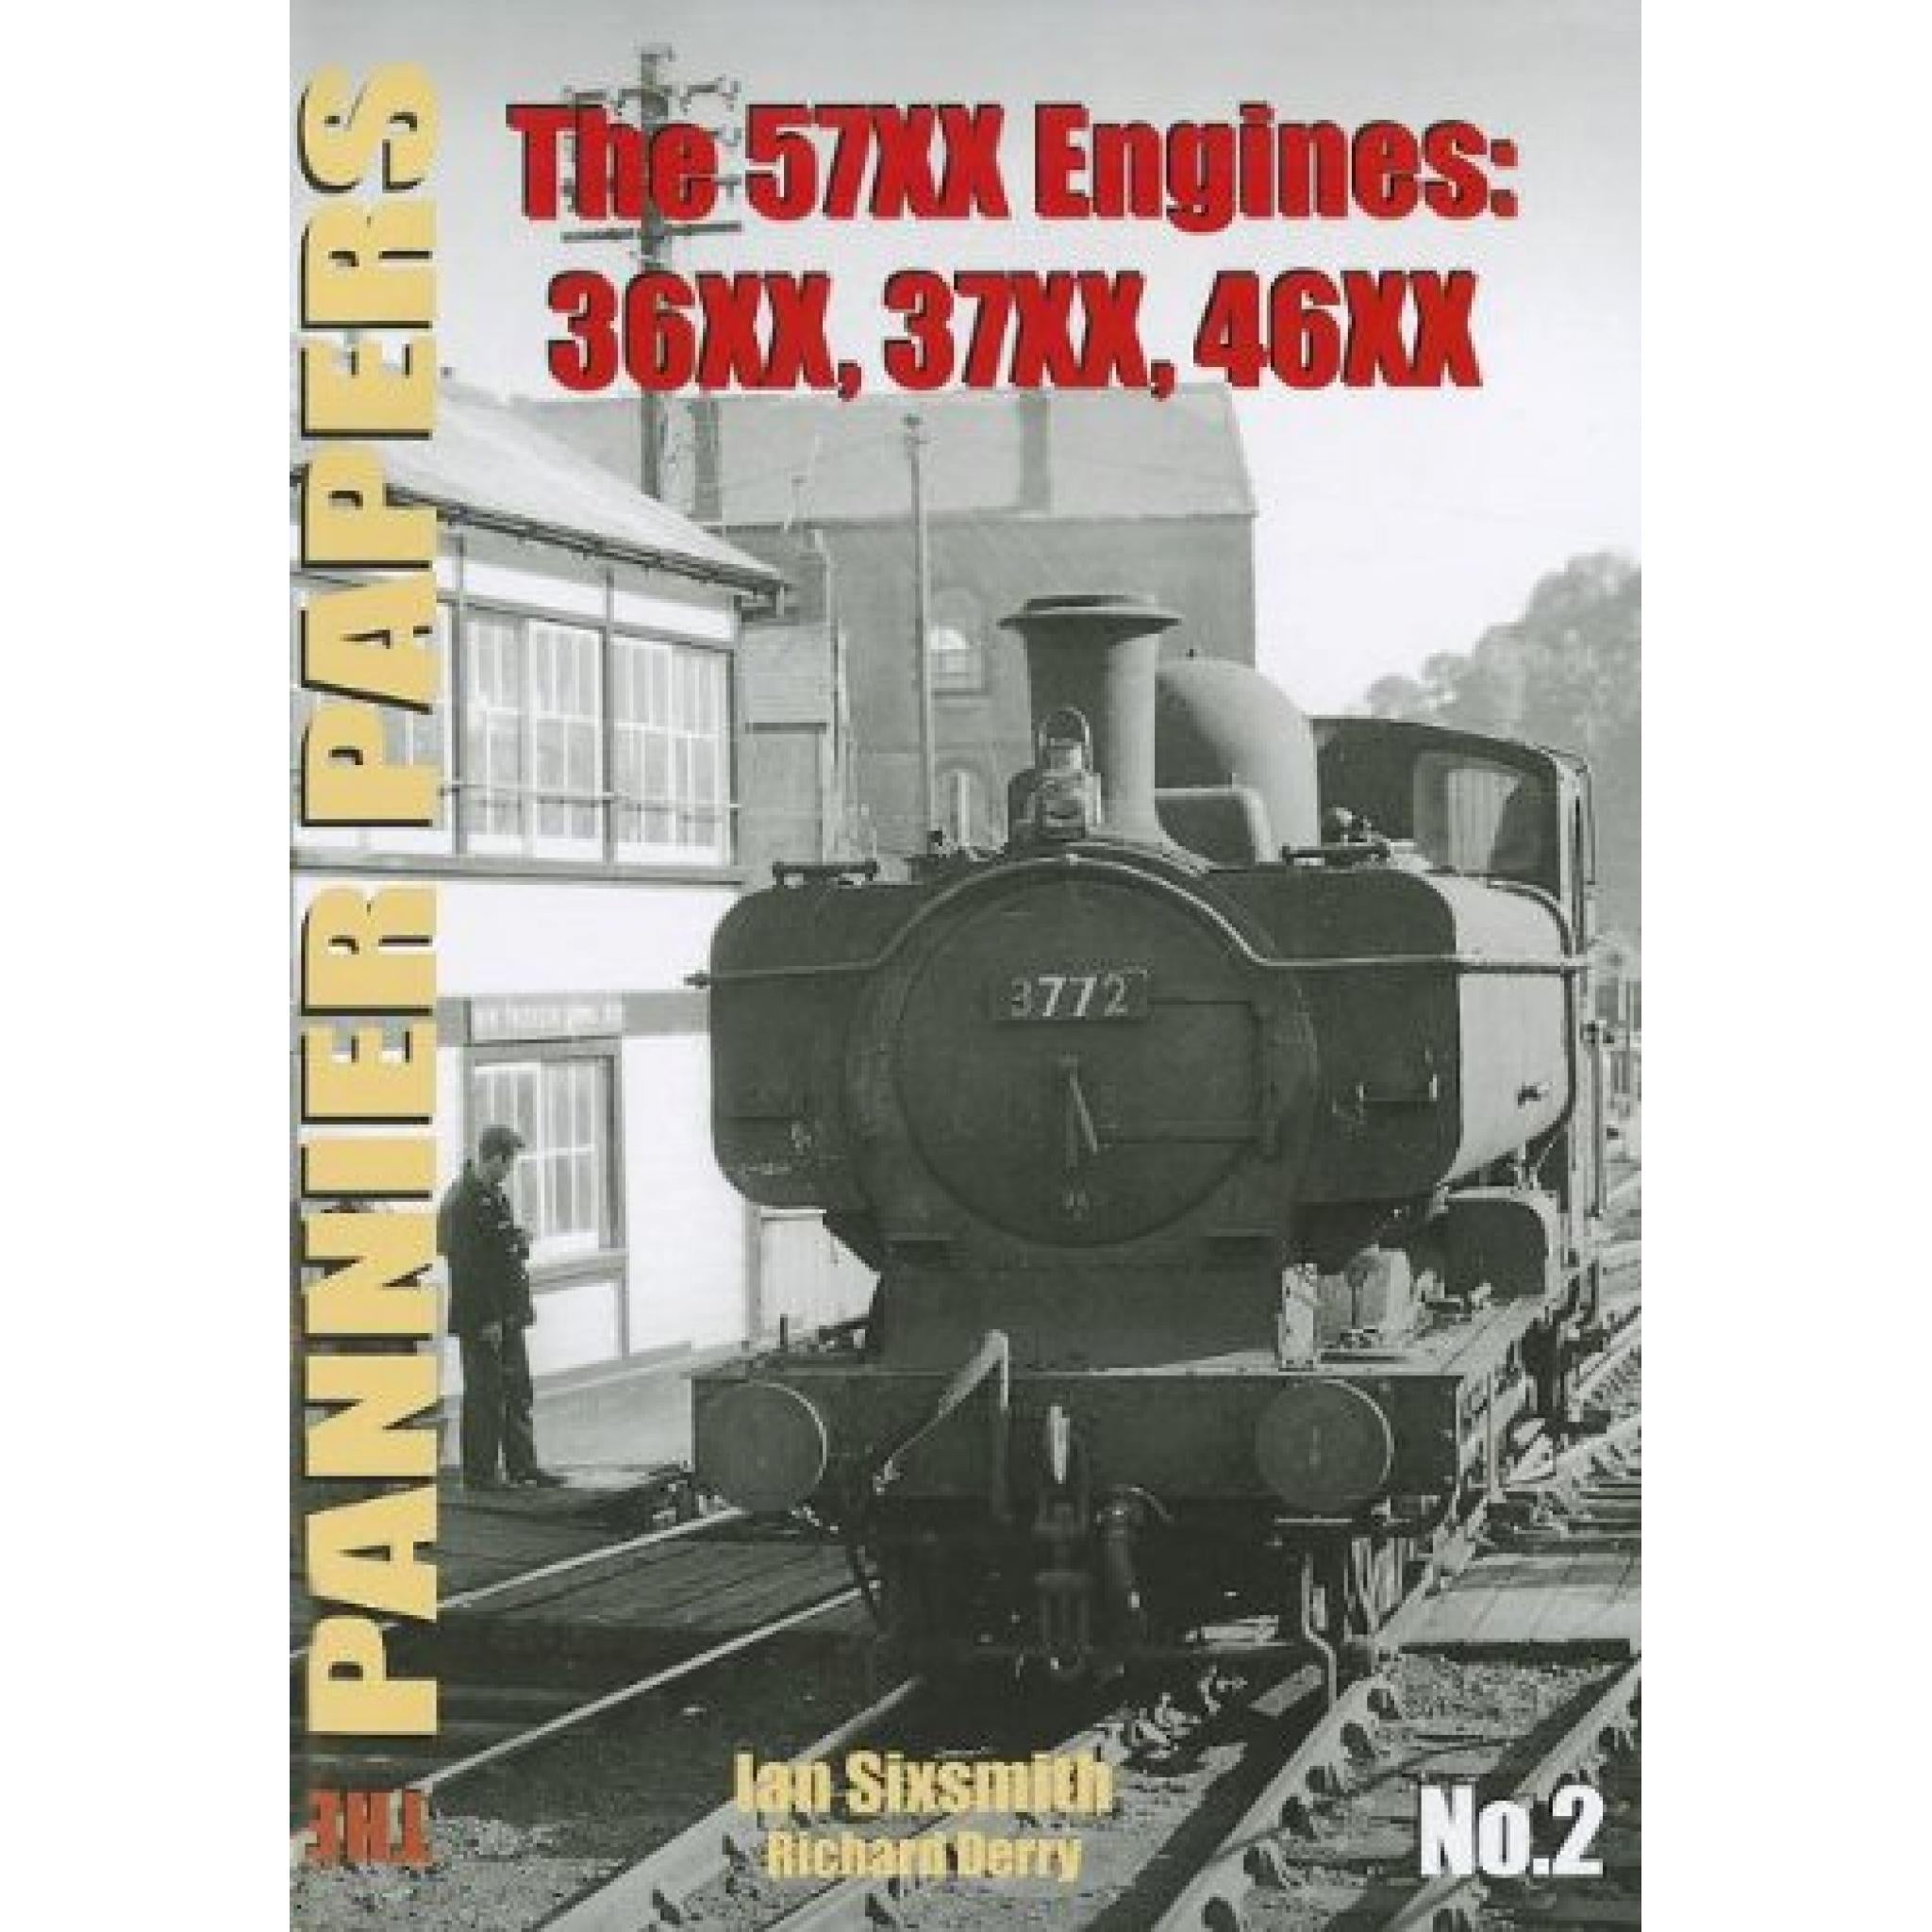 50%+ OFF RRP is £12.95  The PANNIER PAPERS No.2 The 57XX Engines: 36XX, 37XX, 46XX